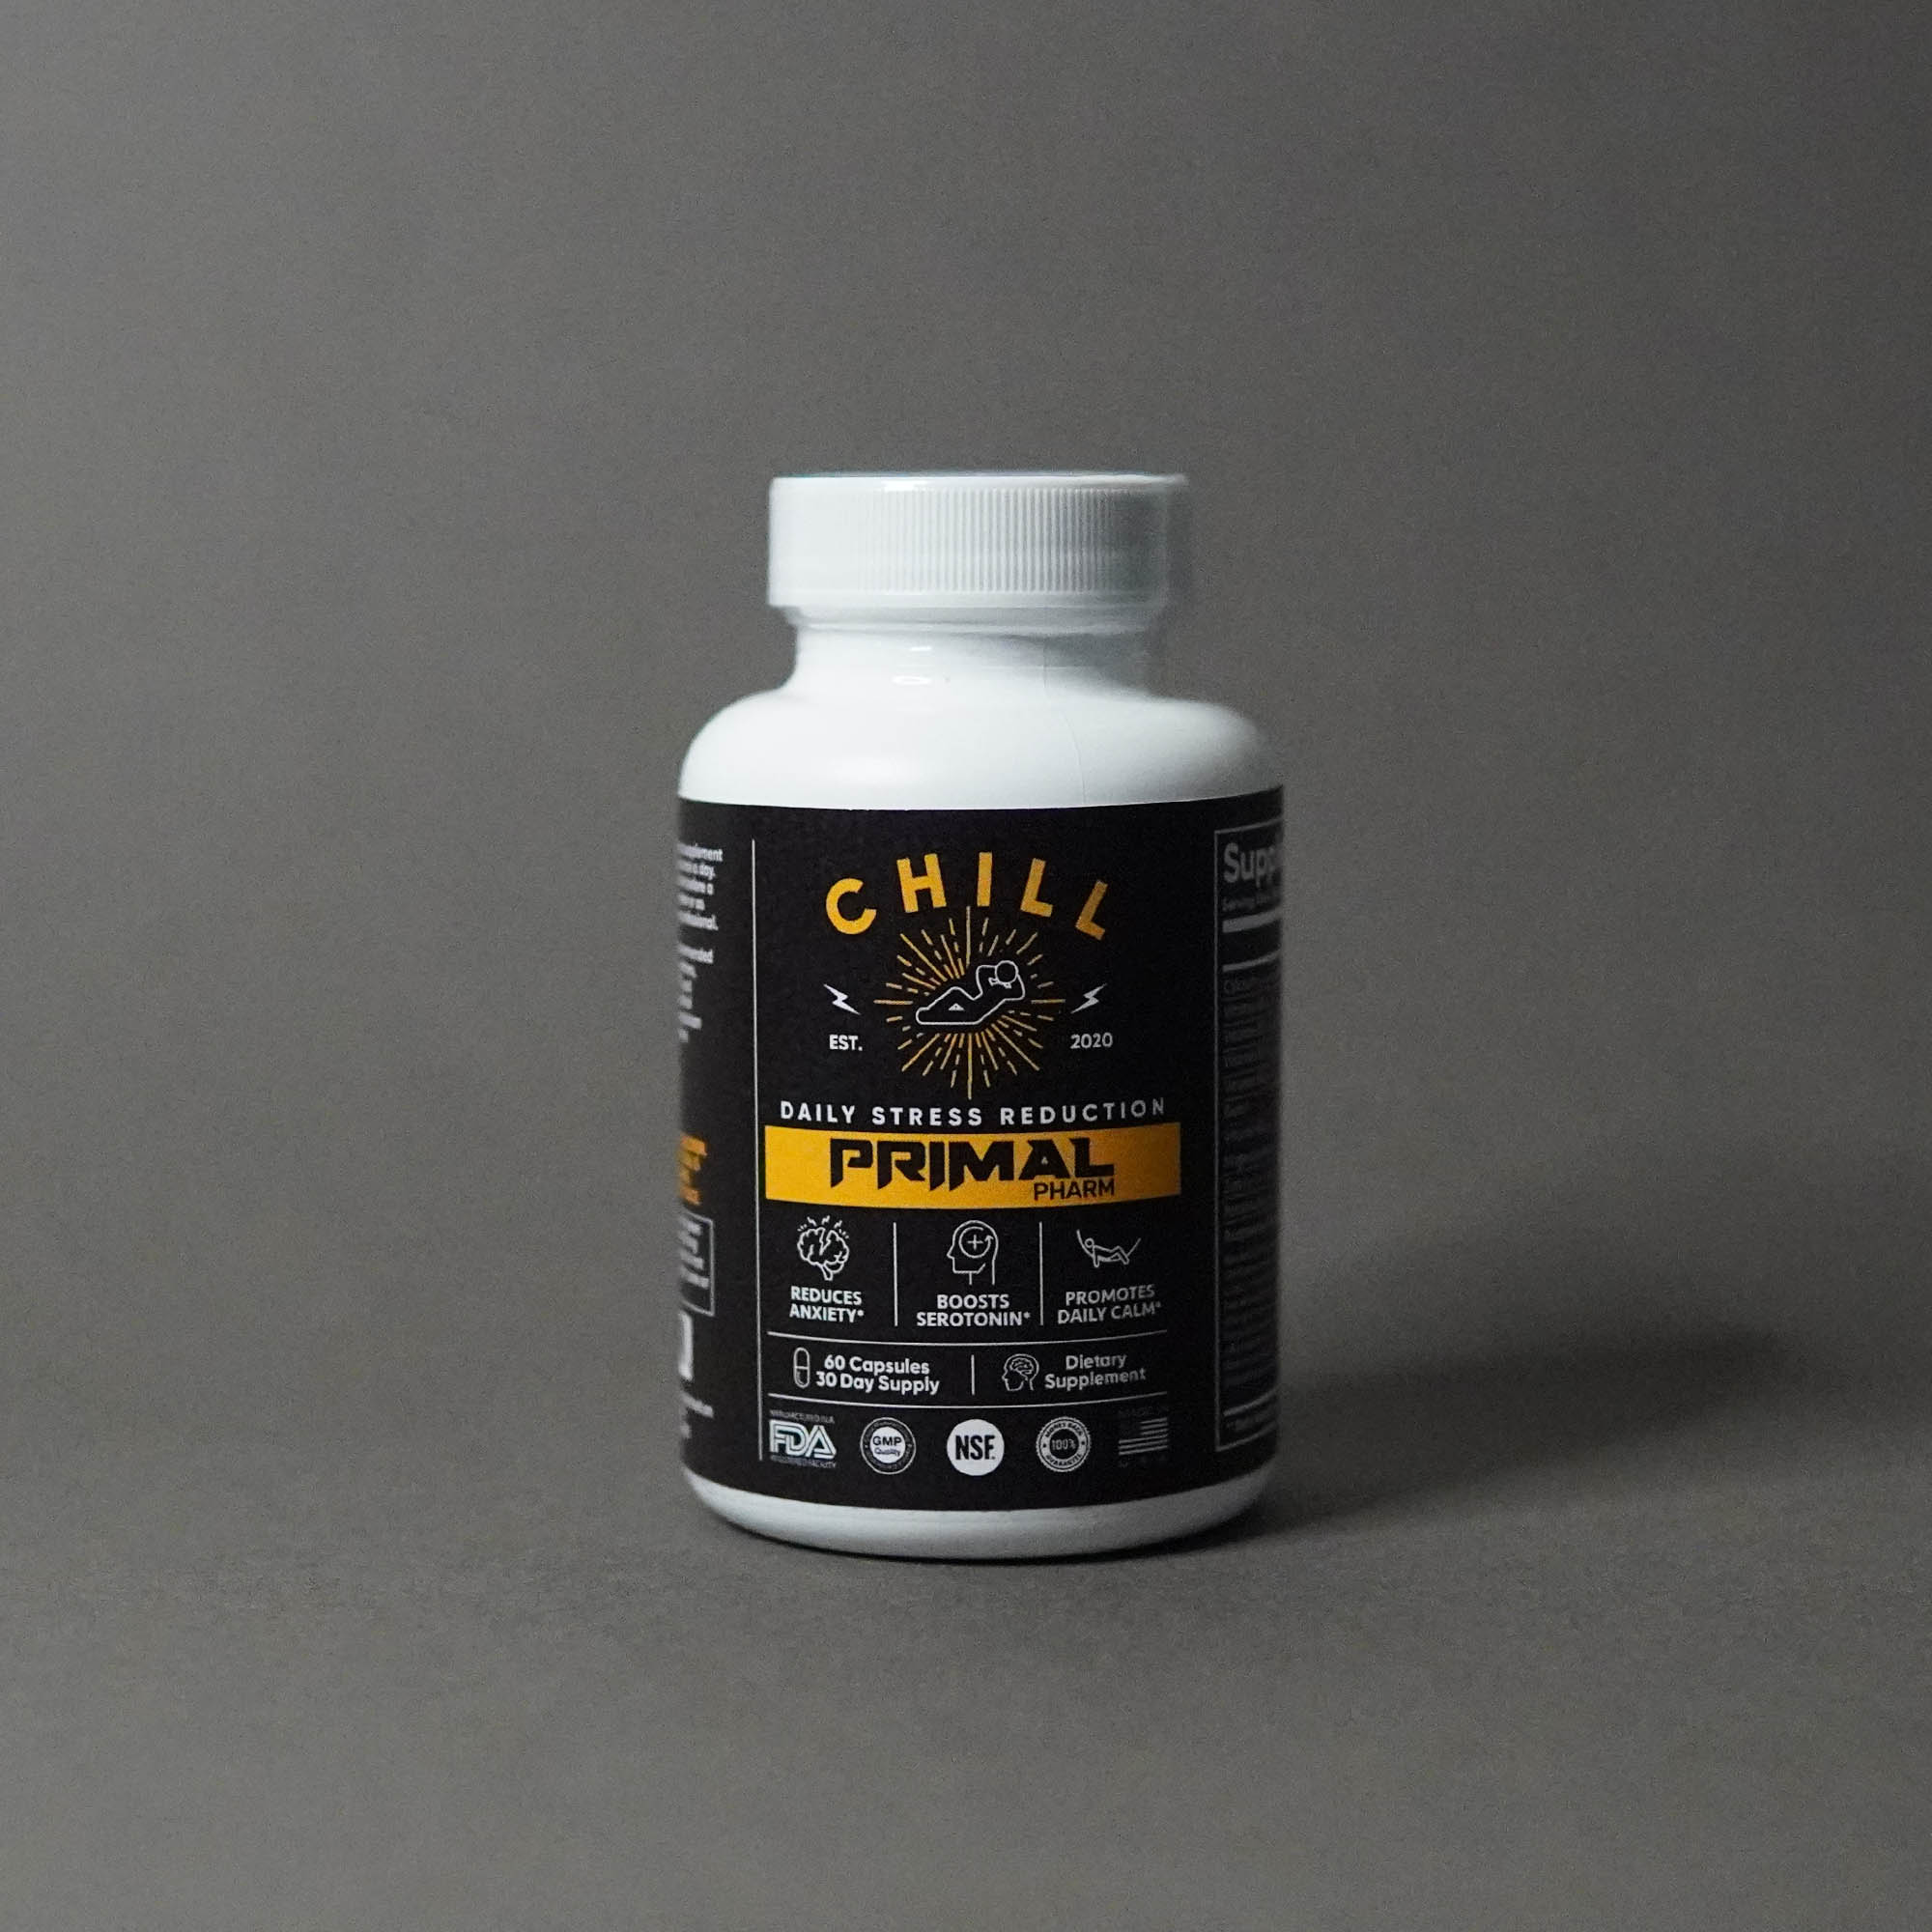 Daily Stress Reduction | CHILL® | PRIMAL PHARM™